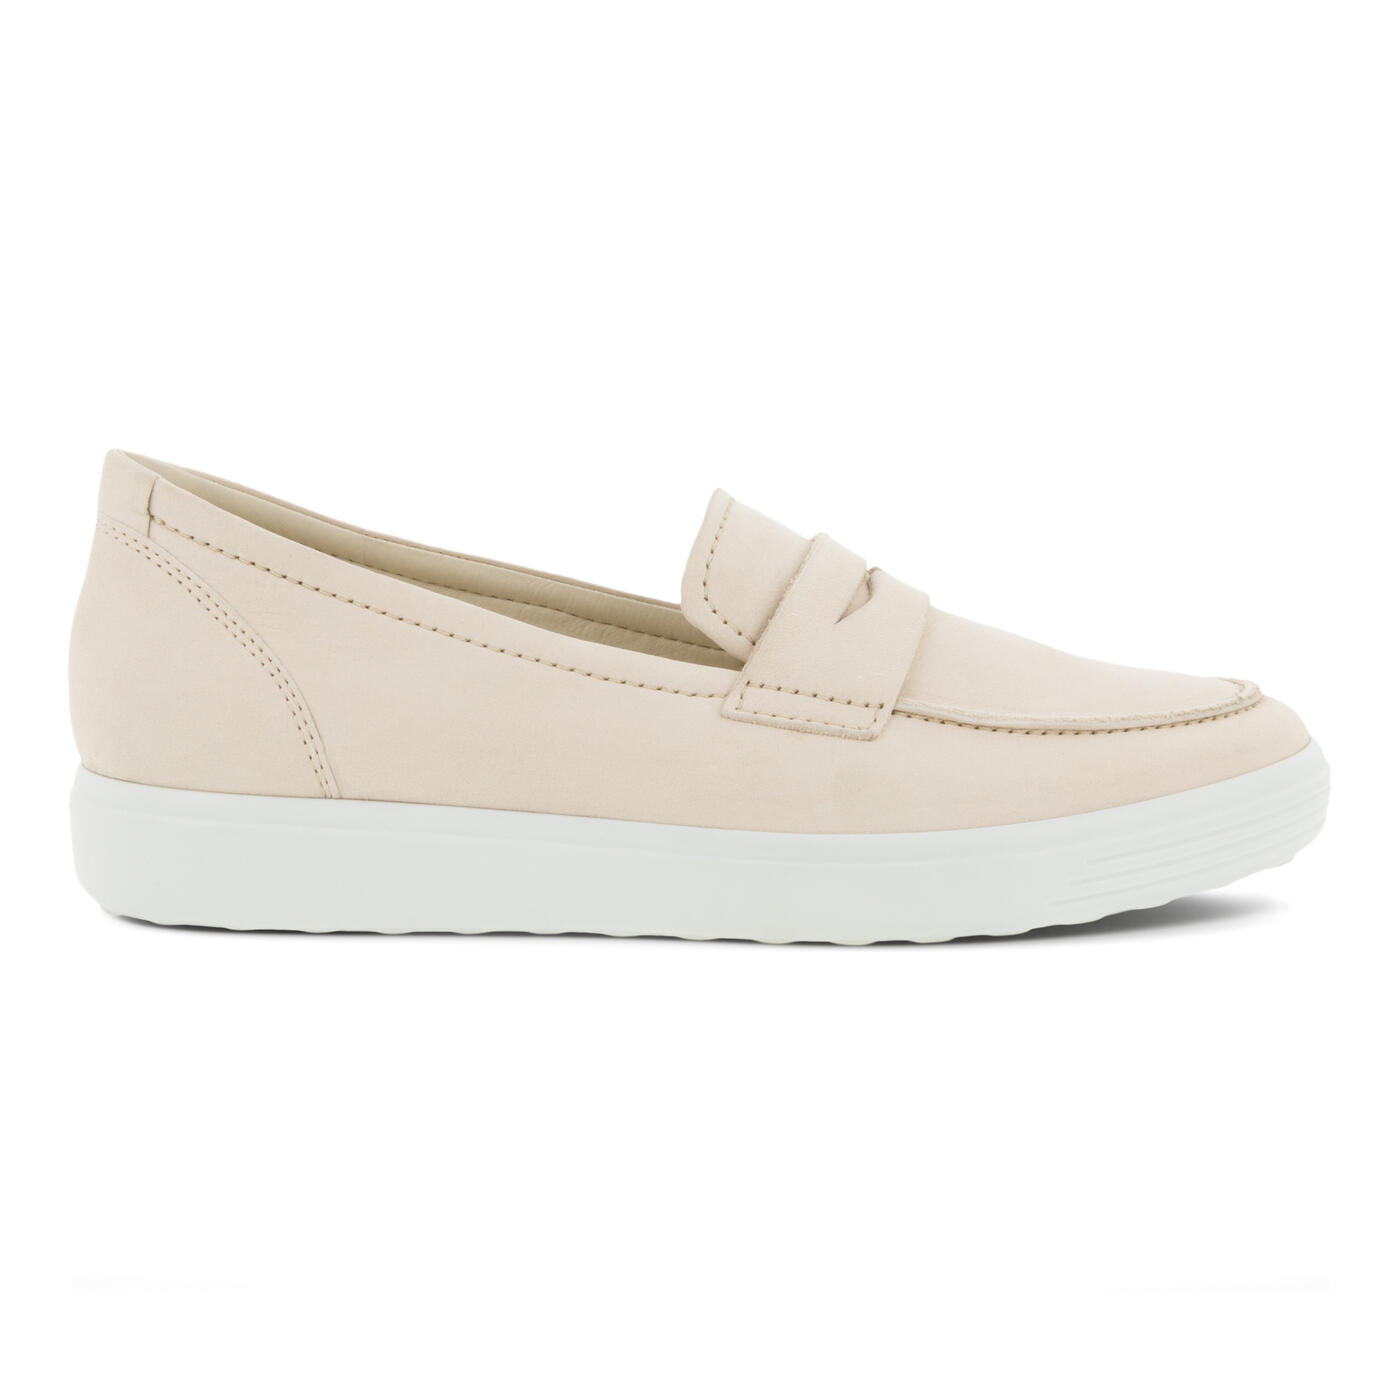 Women's Soft 7 Loafers | ECCO® Shoes